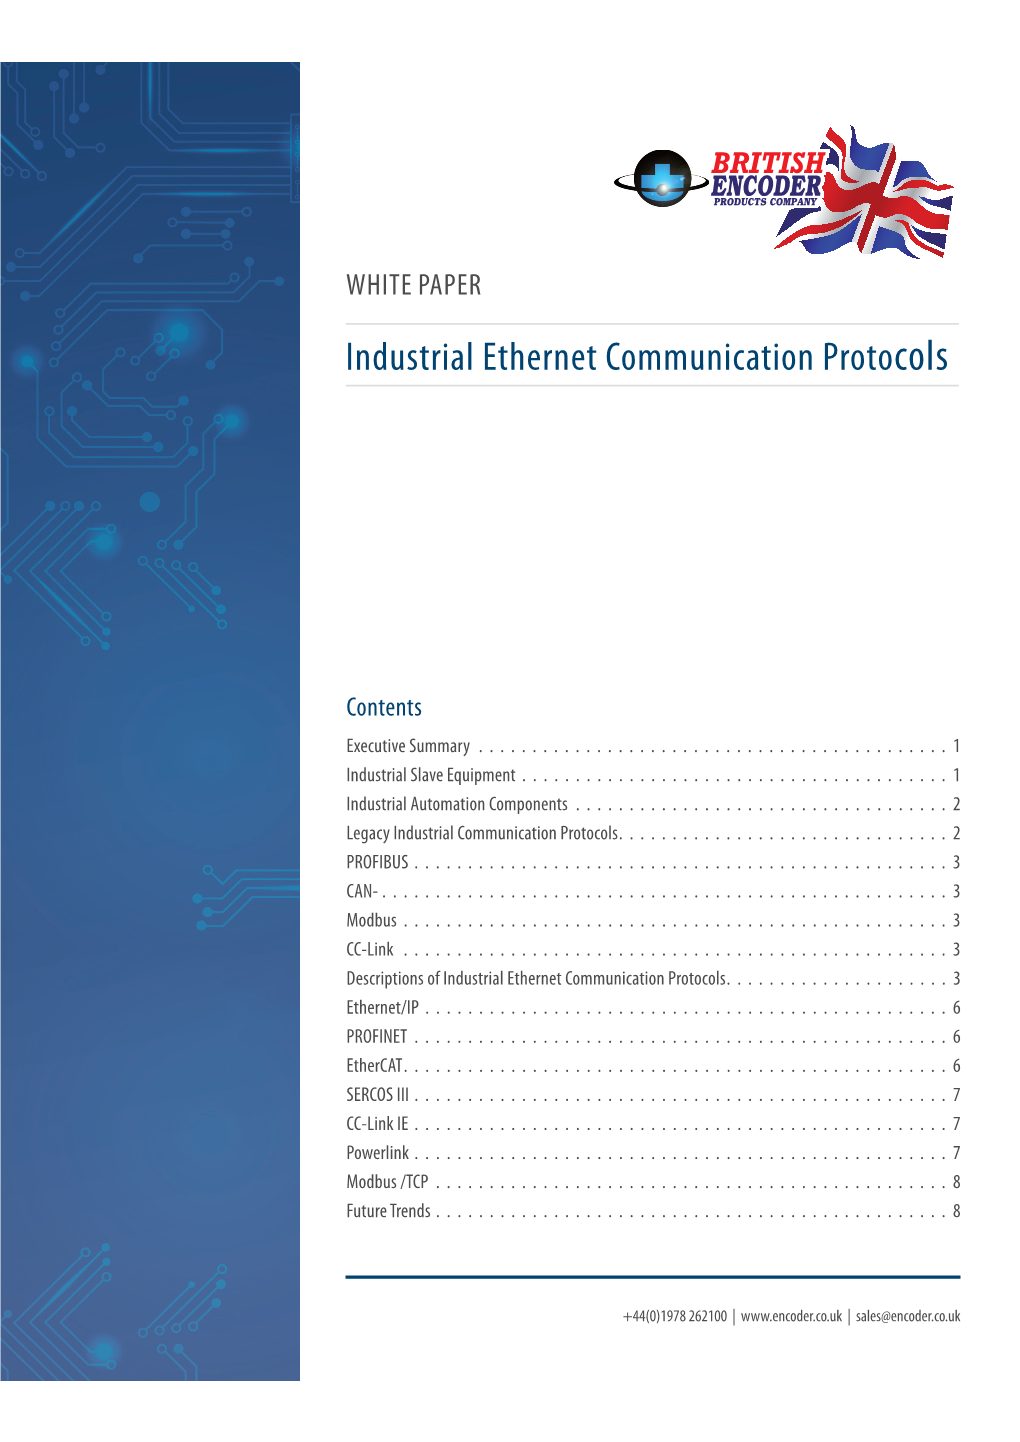 WHITE PAPER Industrial Ethernet Communication Protocols